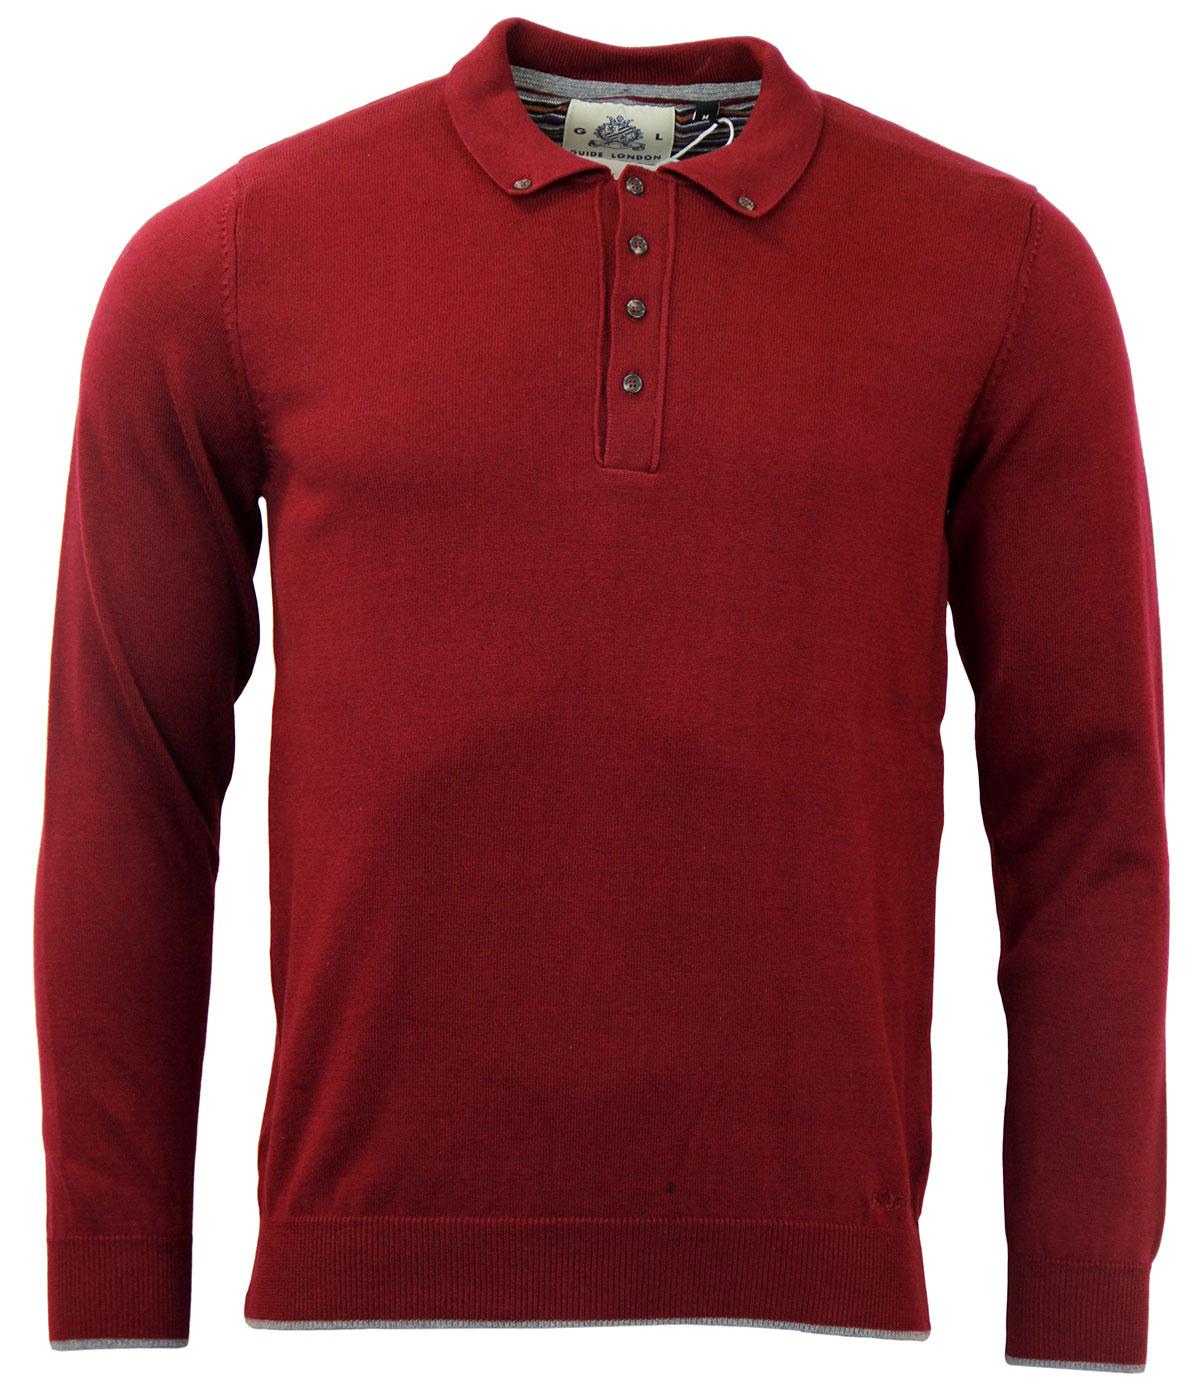 GUIDE LONDON Retro Mod Button Down Knitted Polo in Dark Red